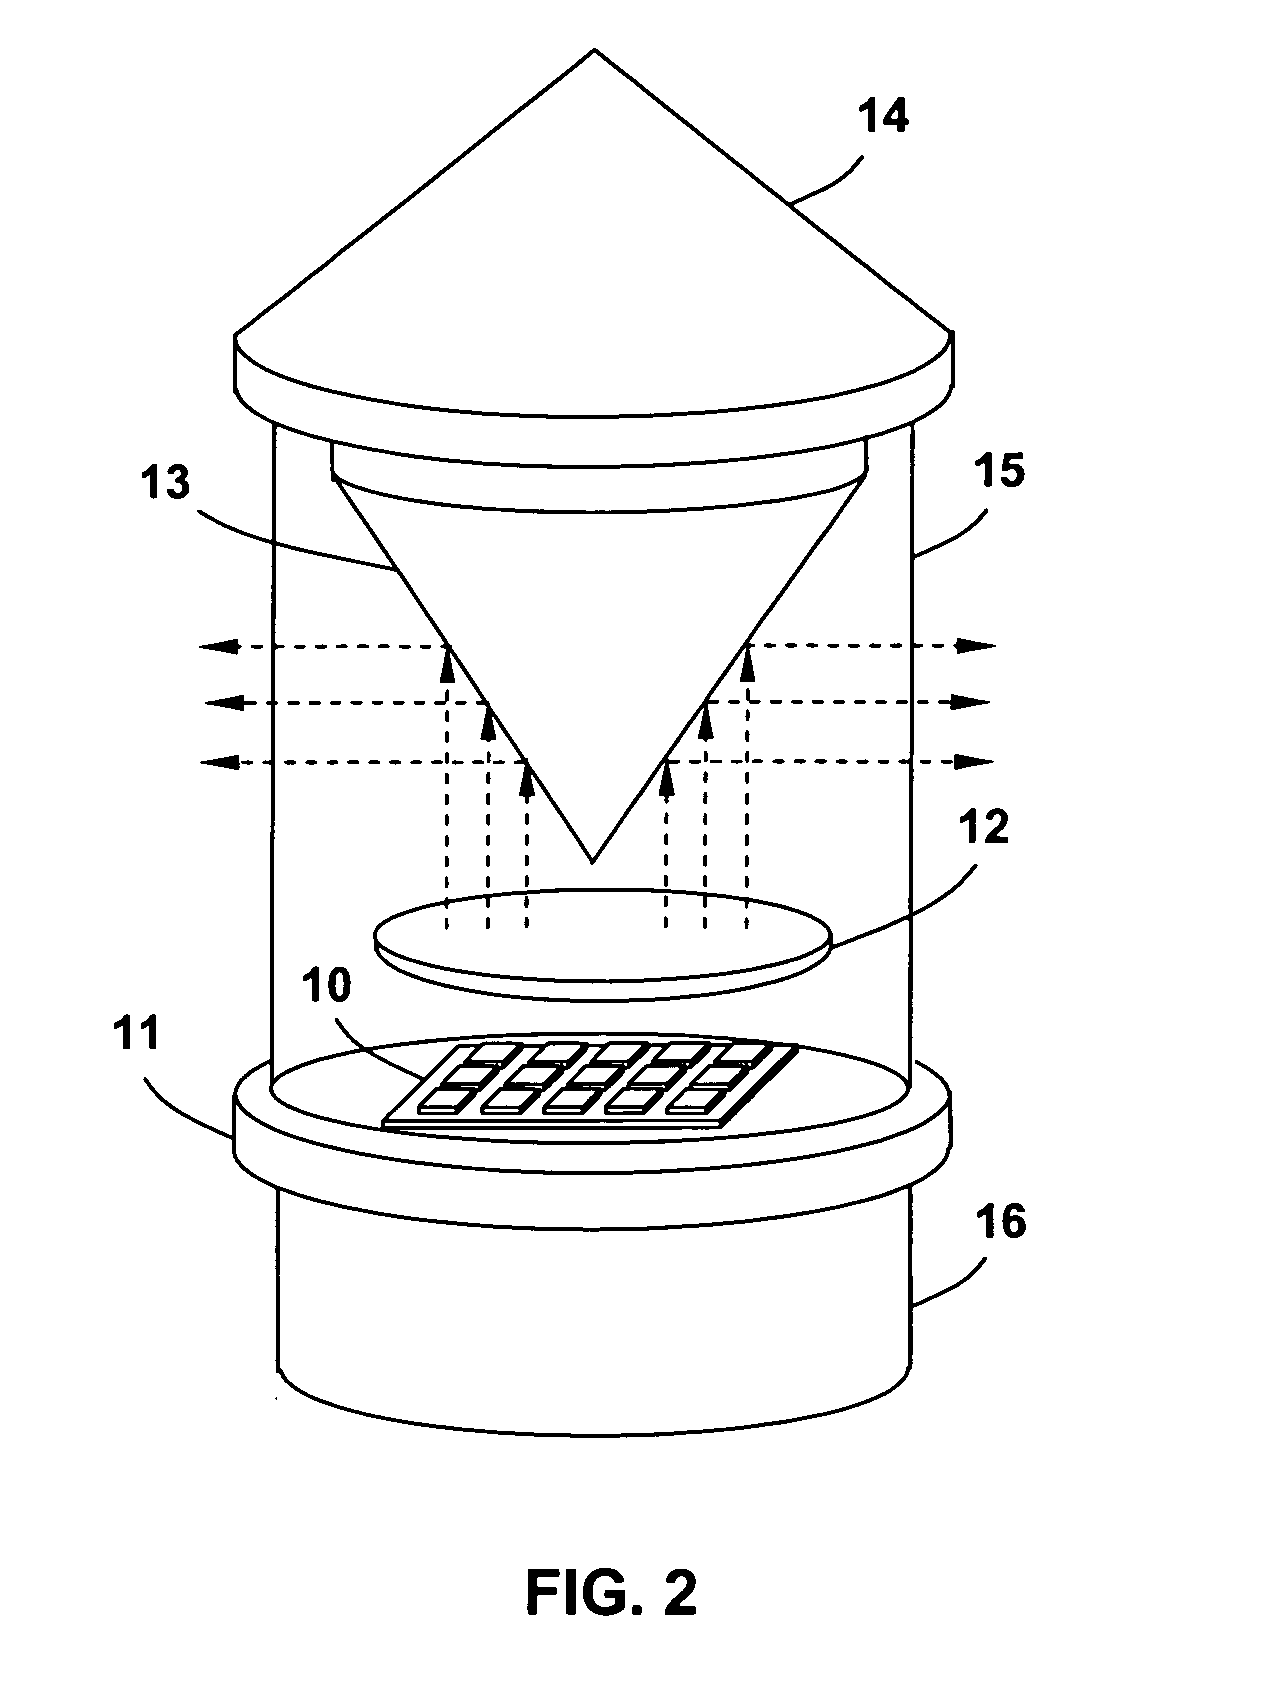 Solid-state lighting apparatus for navigational aids